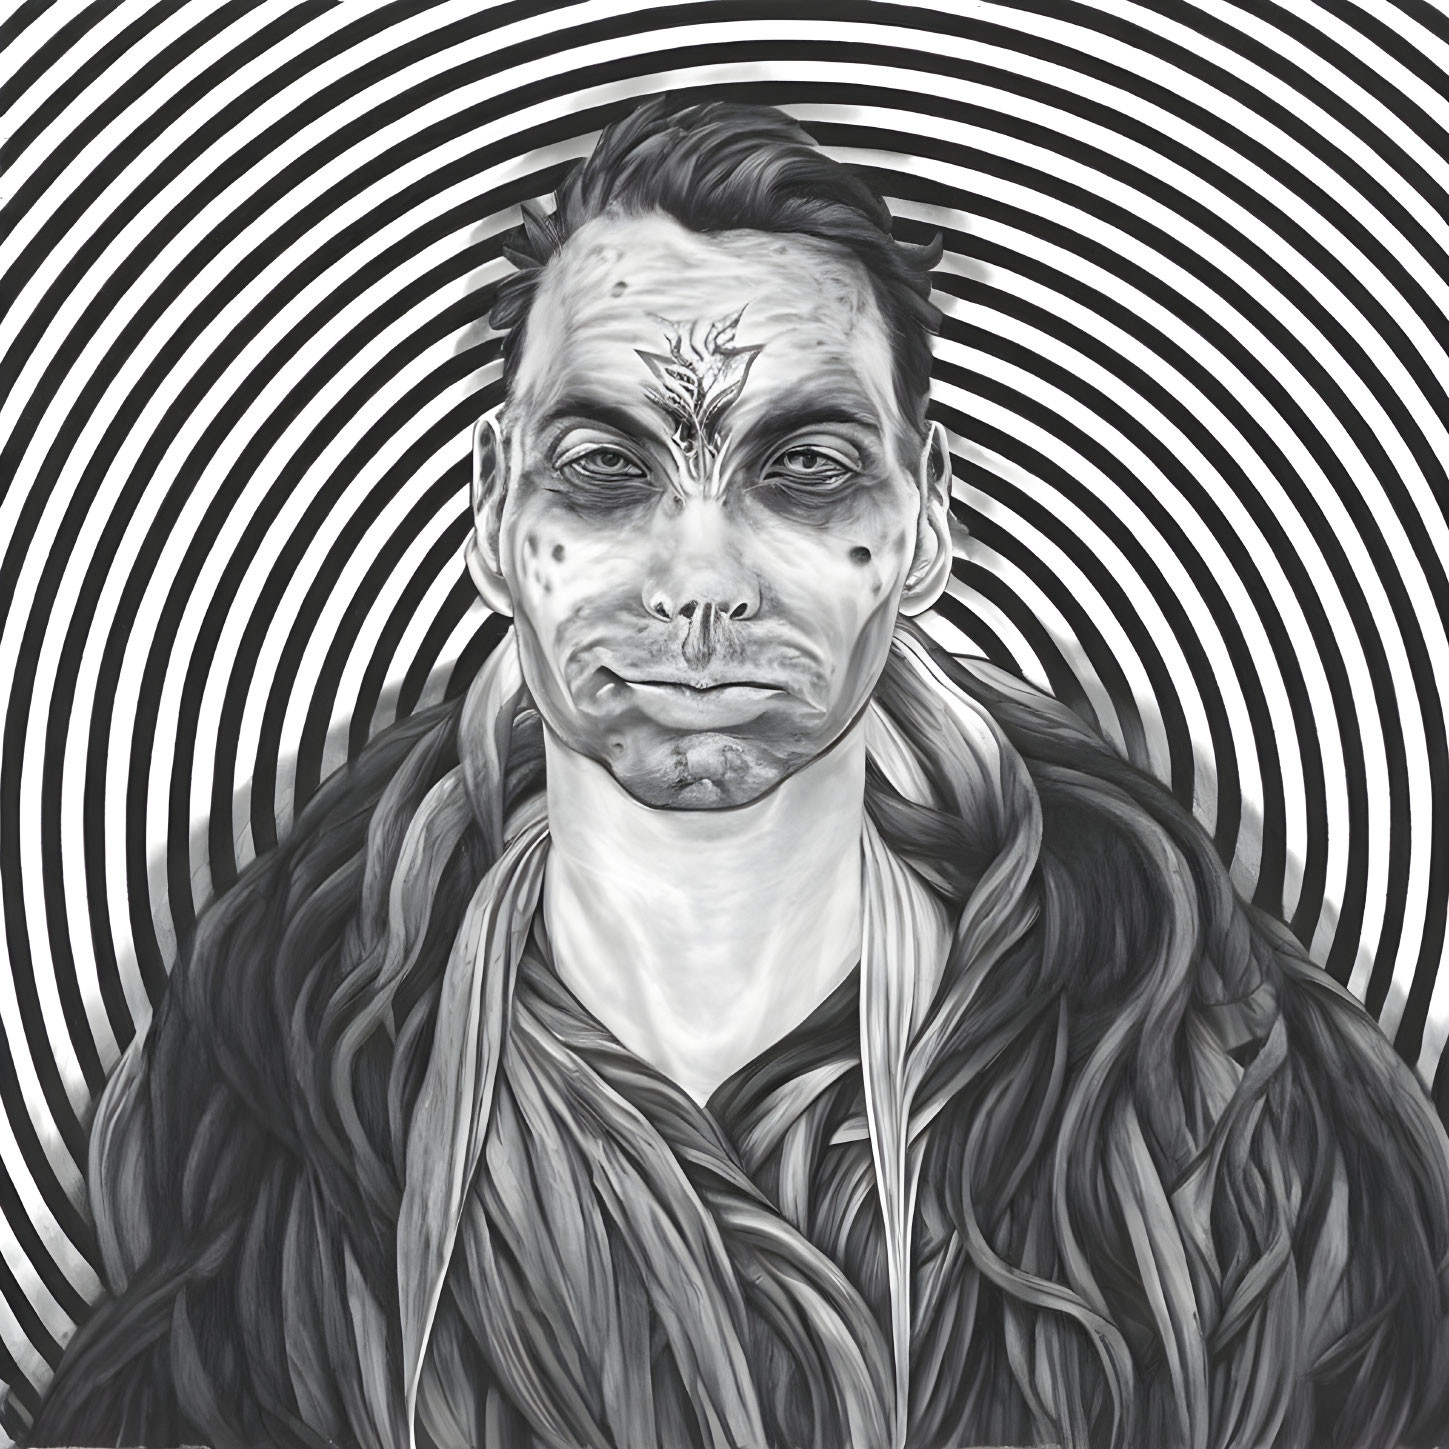 Monochrome portrait with facial markings and intricate patterns on swirling background